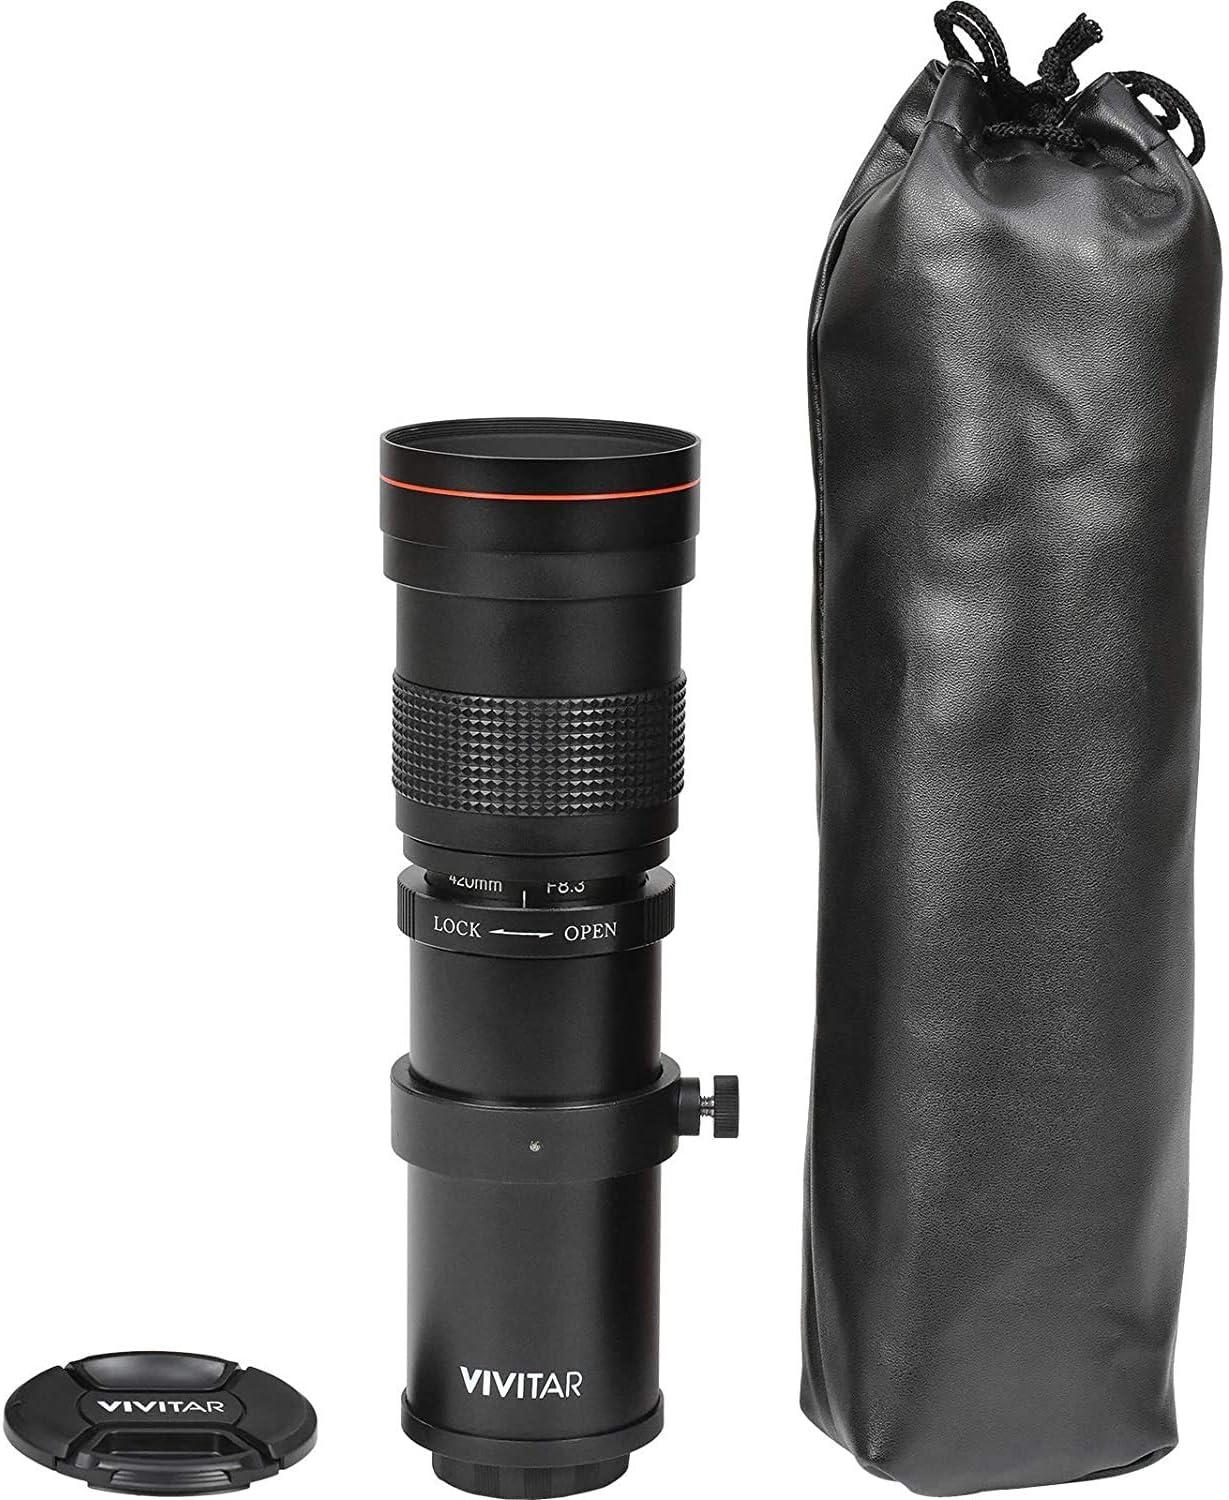 High-Power 420-1600mm f/8.3 HD Manual Telephoto Zoom Lens for